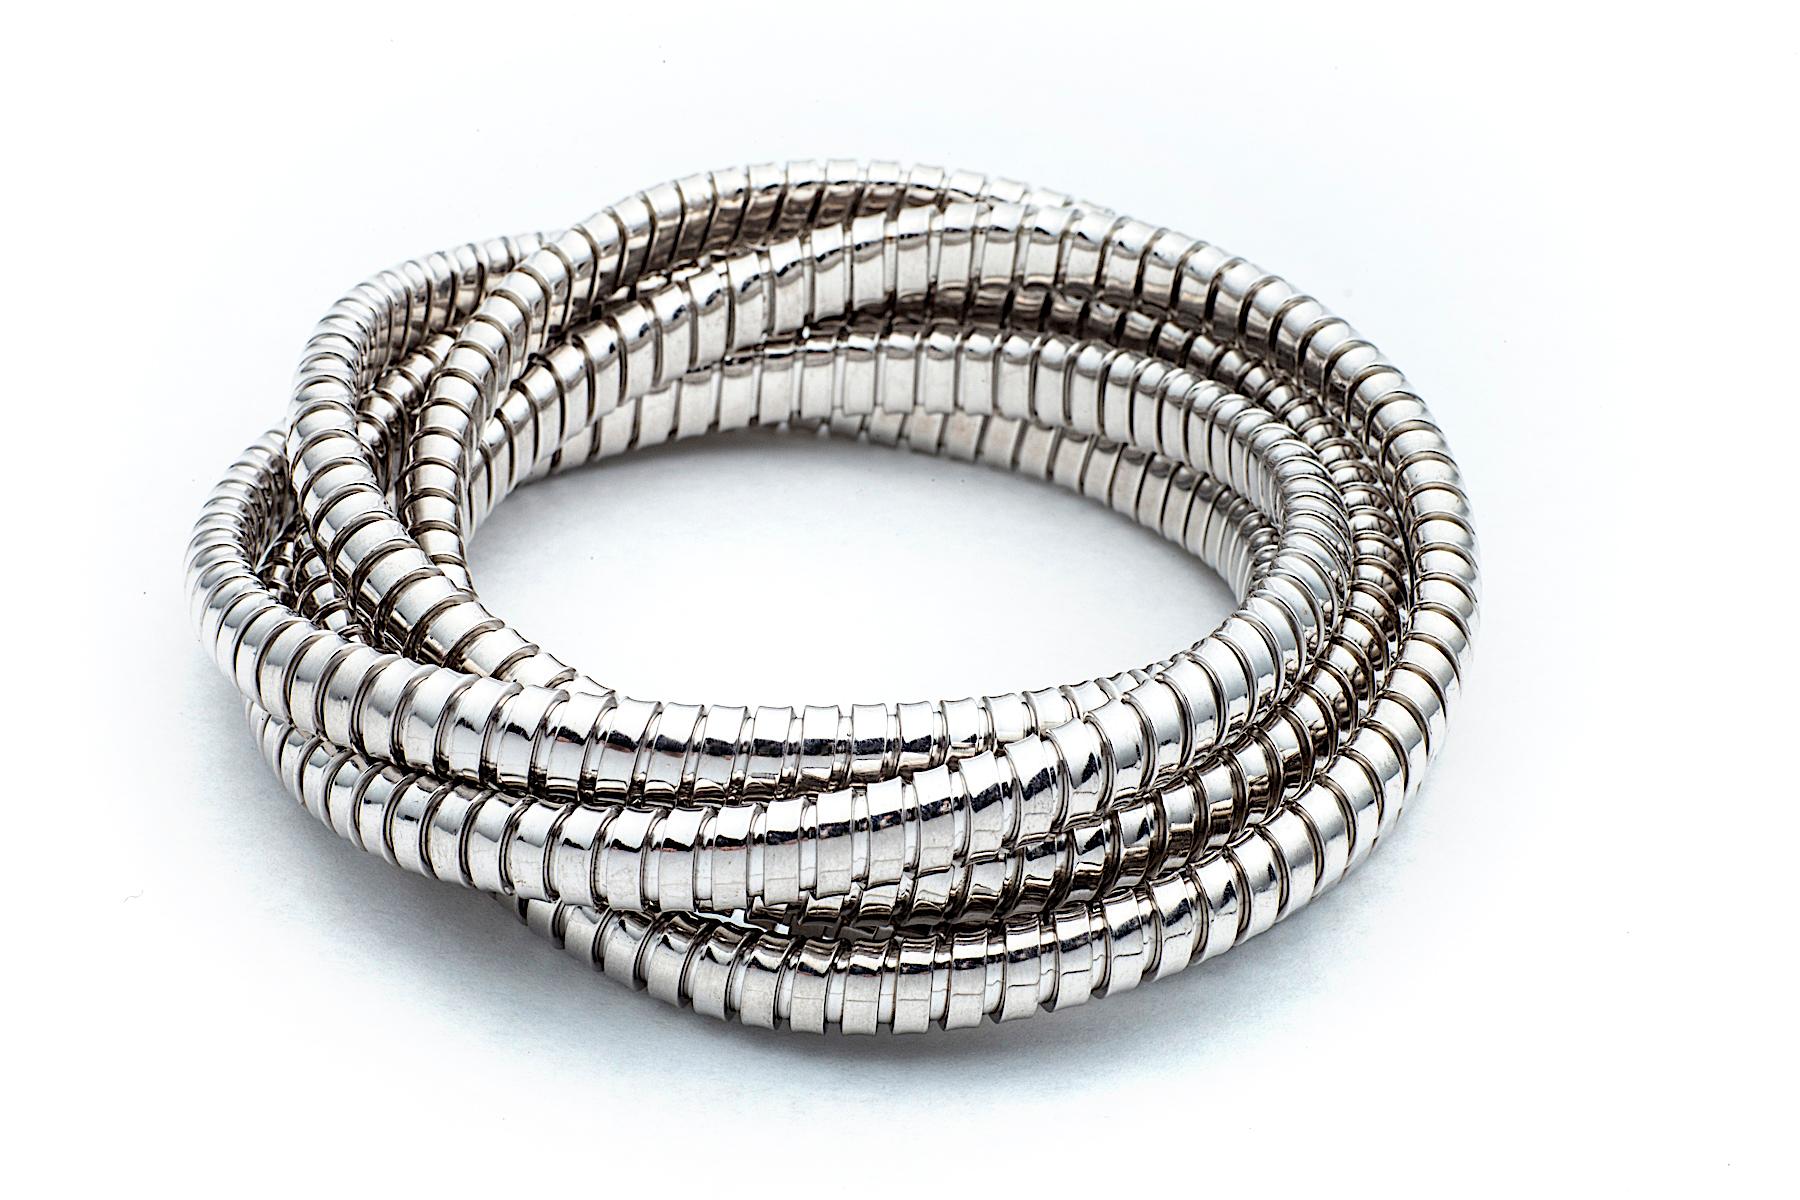 With a modernist mood, this intertwined six strand bangle bracelet represents the positive synergy between industrially engineered objects and their handmade jewelry version crafted today.  Inspired by the flexible metal piping from luxury sports